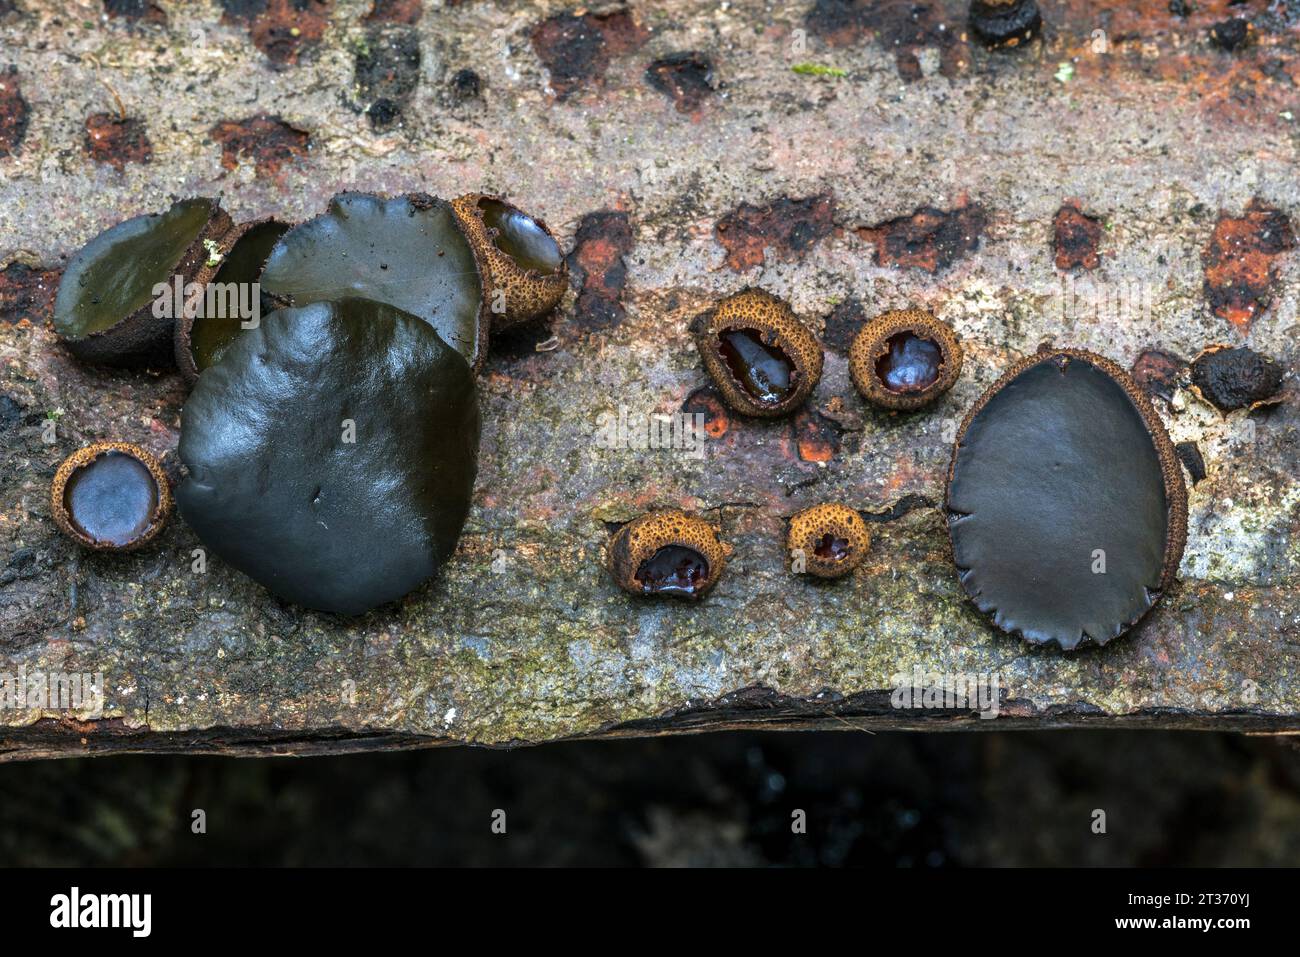 Black bulgar / black jelly drops (Bulgaria inquinans) fungi growing on bark of felled tree showing different growth stages in autumn forest Stock Photo